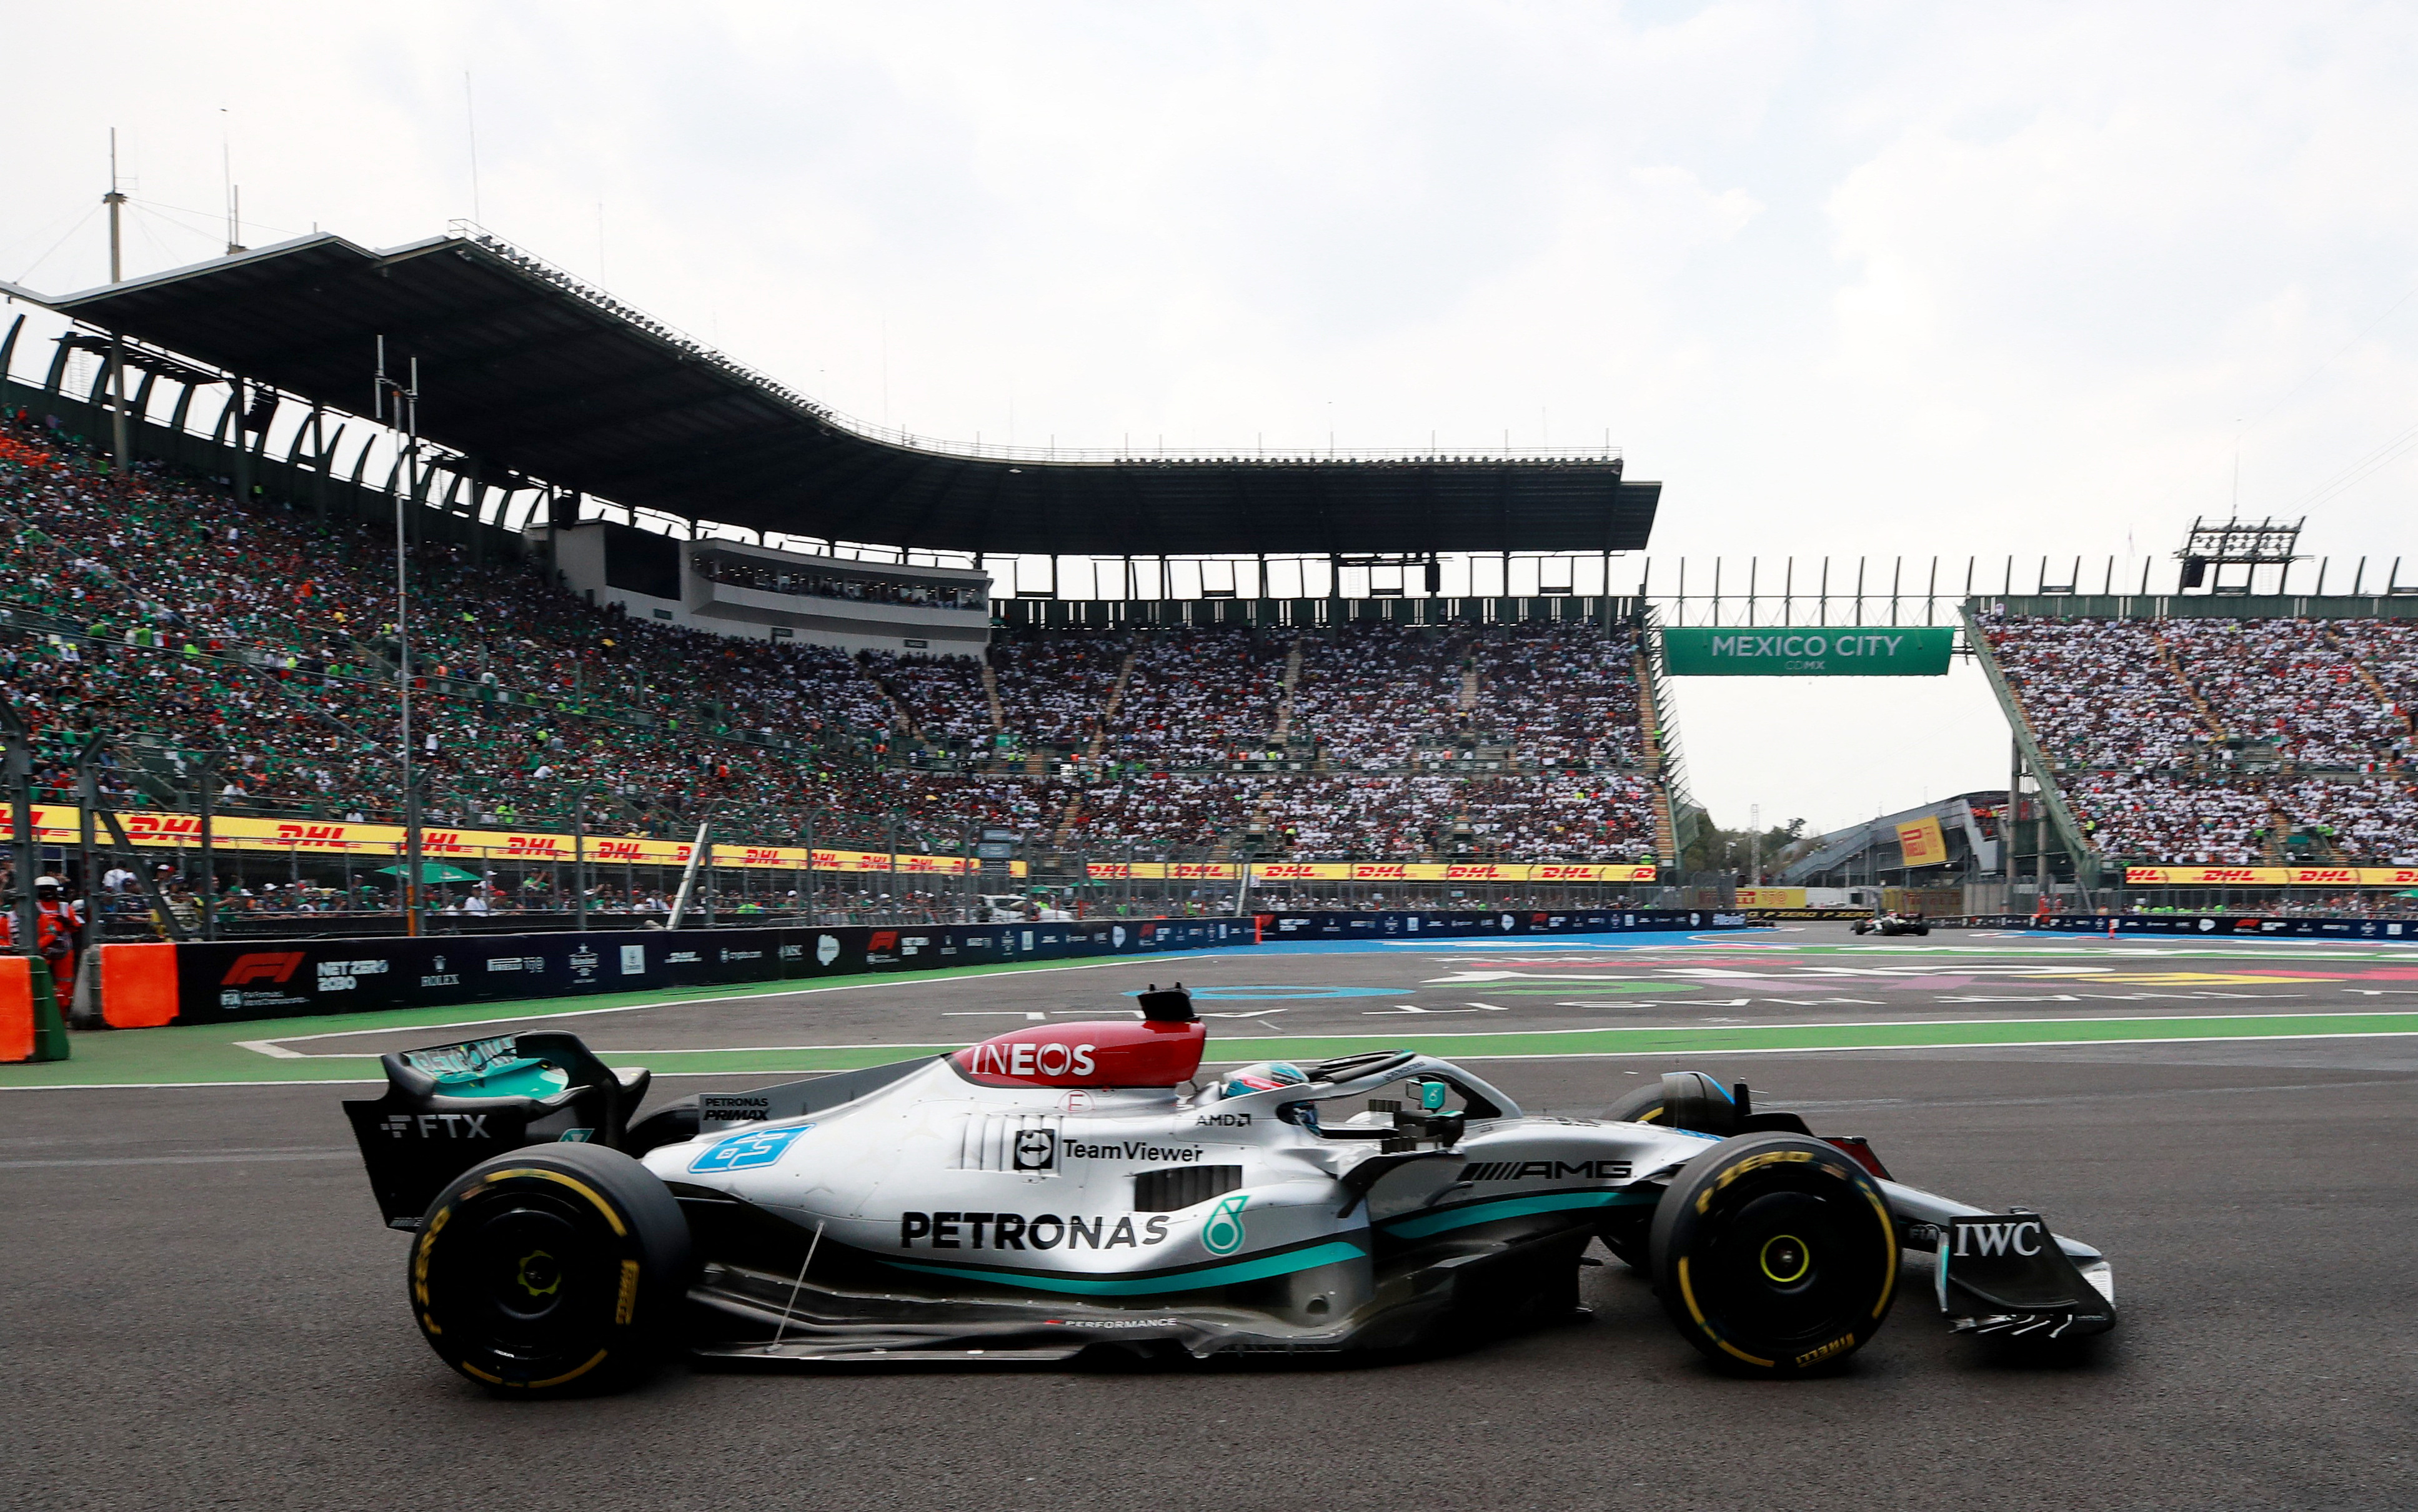 Mercedes F1 team suspends partnership with FTX